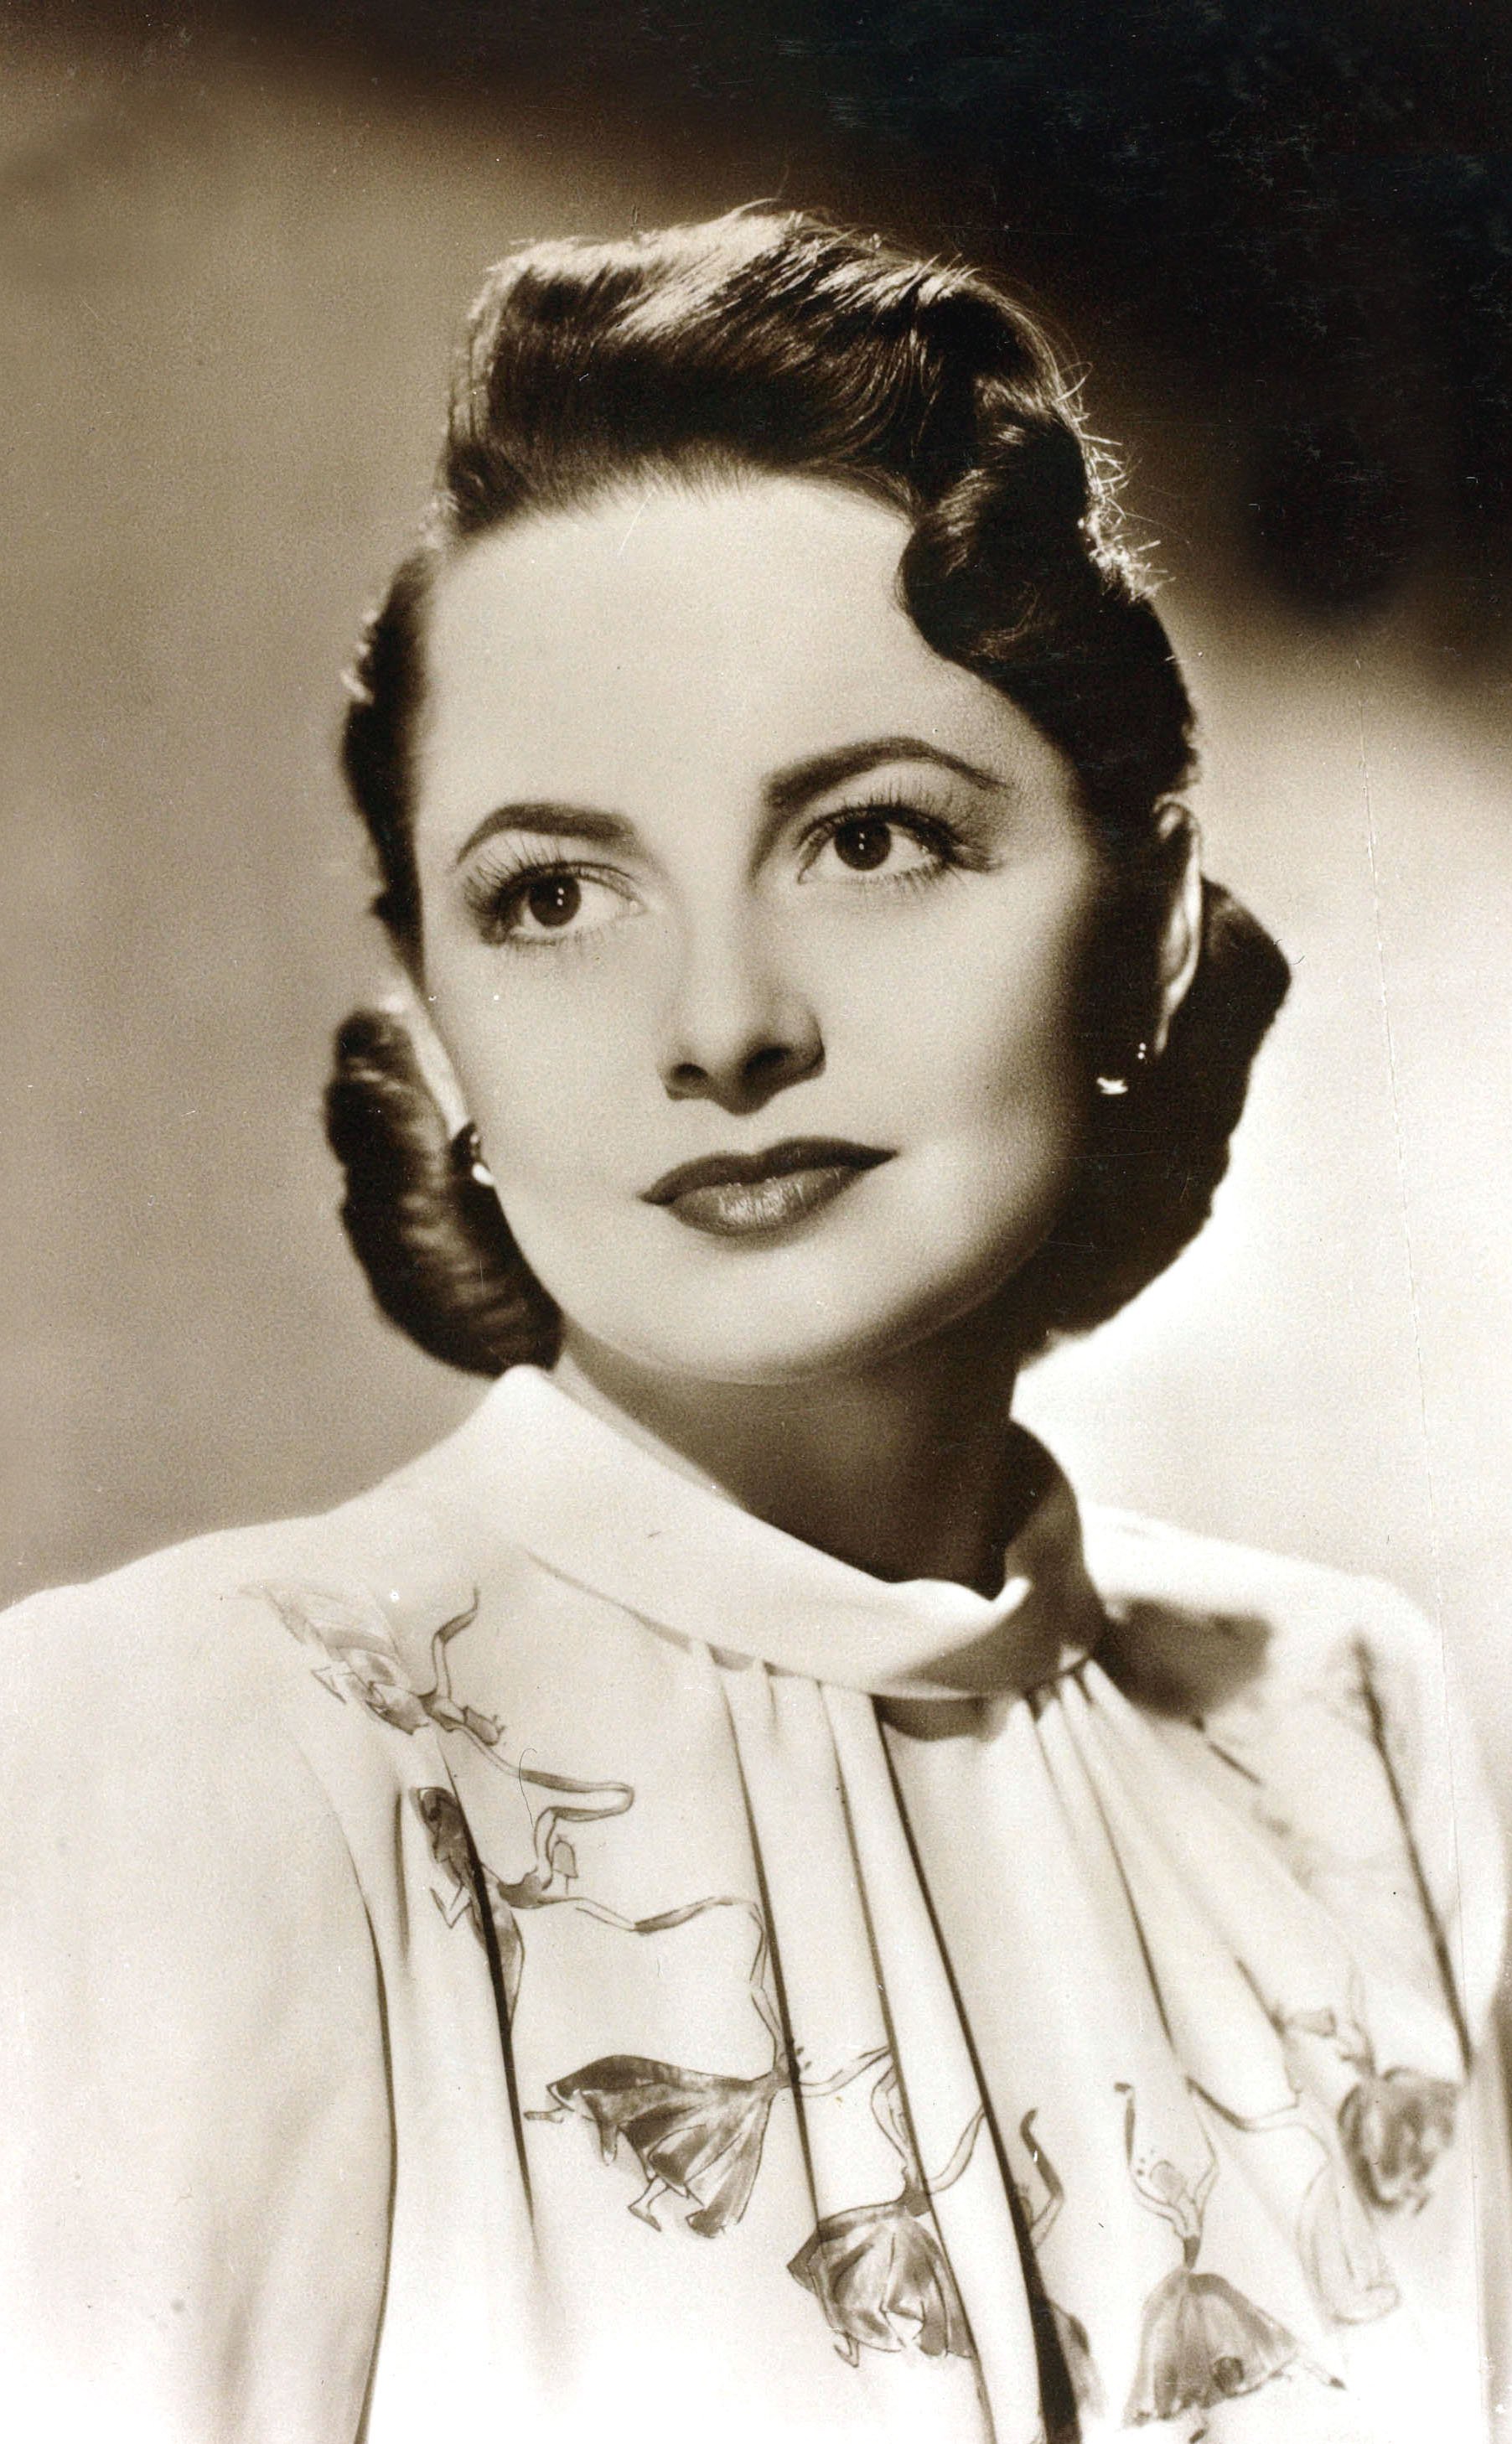 Olivia De Havilland posing in an old image in circa 1940. | Source: Bob Thomas/Popperfoto/Getty Images